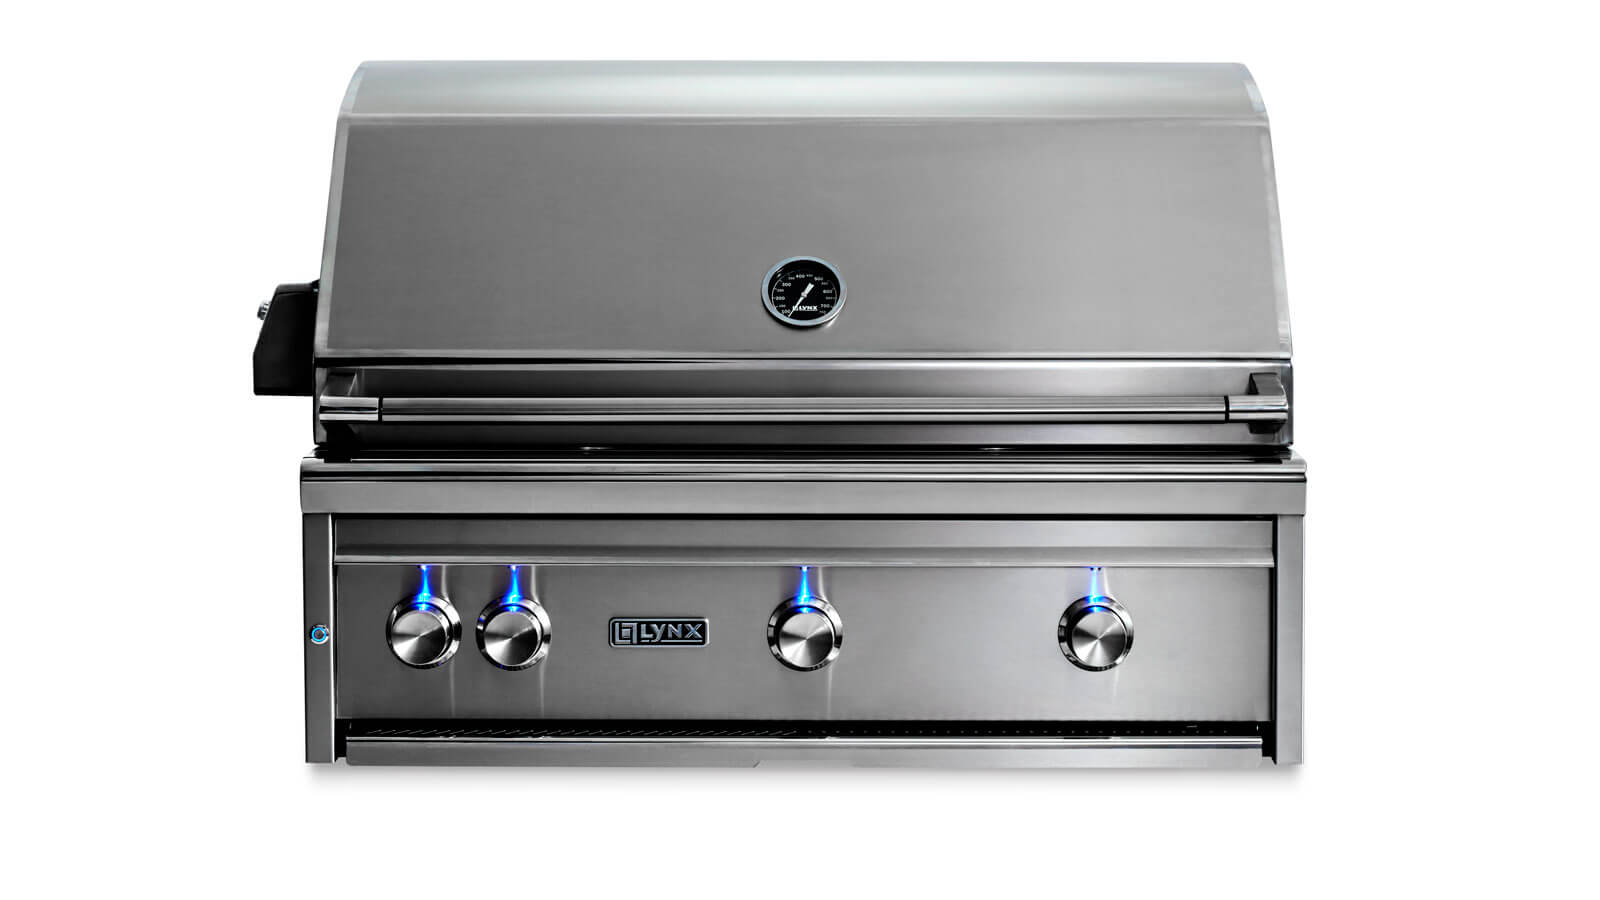 Lynx 36" Professional Built-In Grill with All Trident Infrared Burners and Rotisserie (L36ATR)